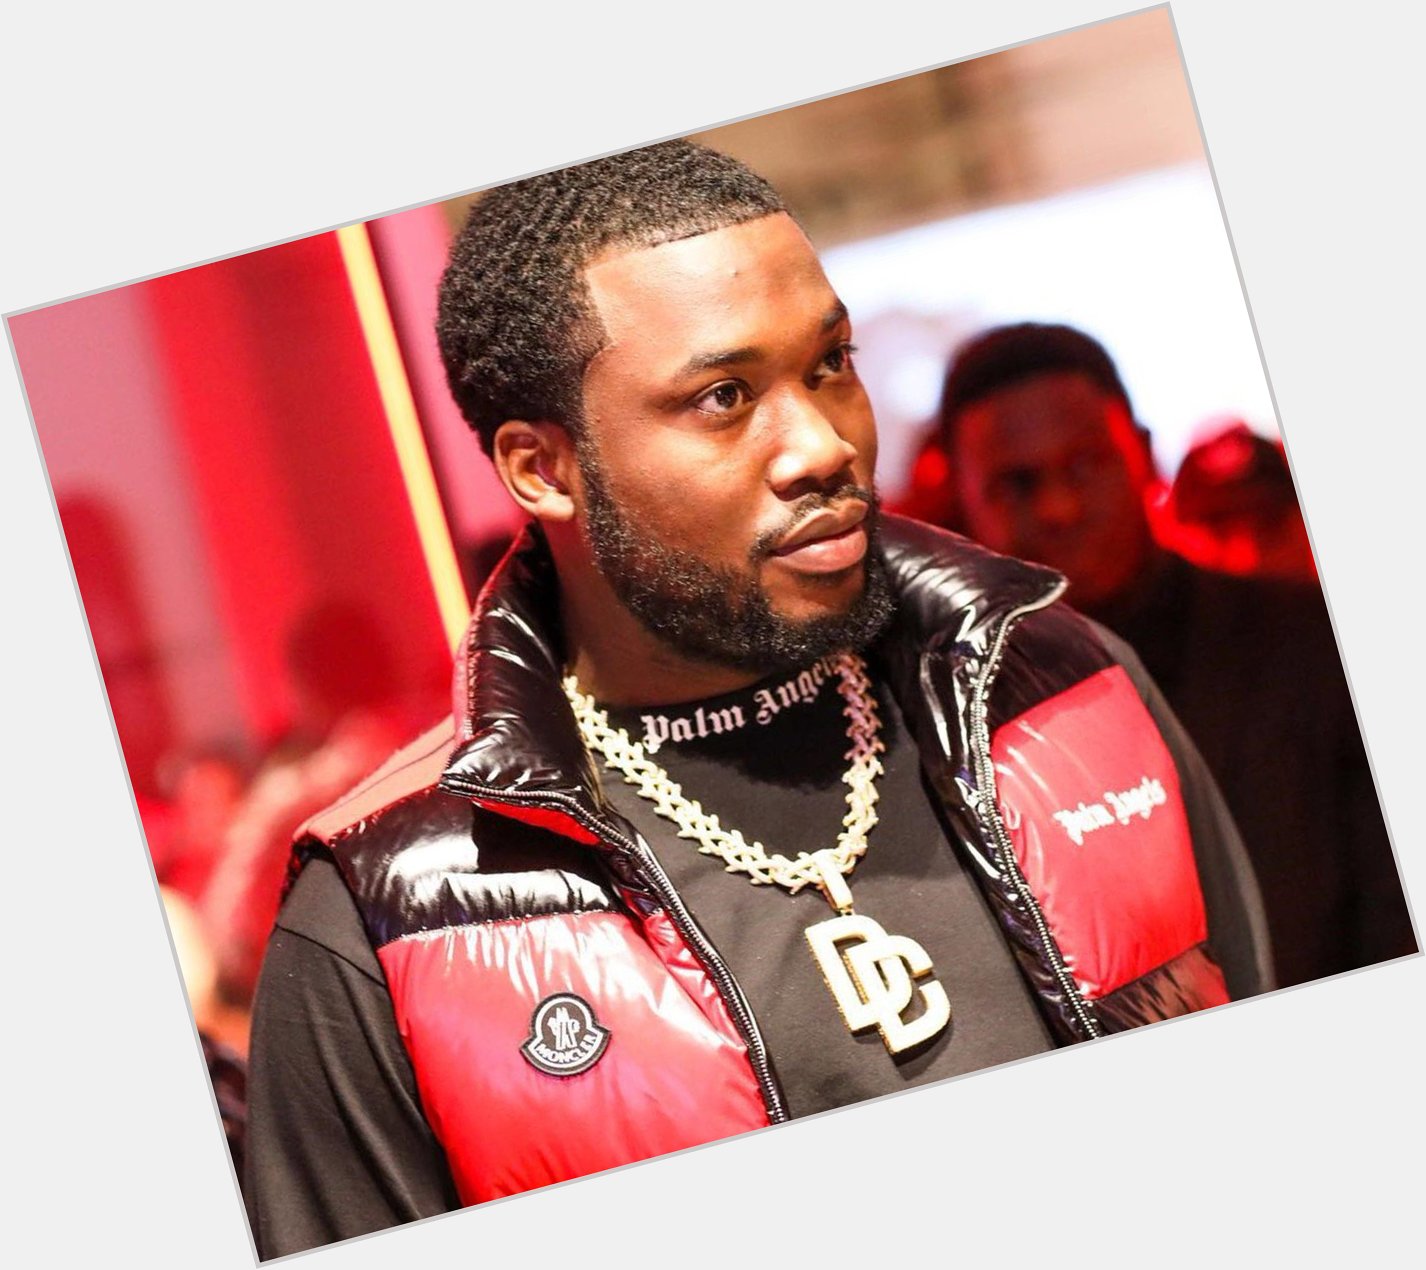 Happy Birthday Meek Mill,Im Dreamchasers for Life  